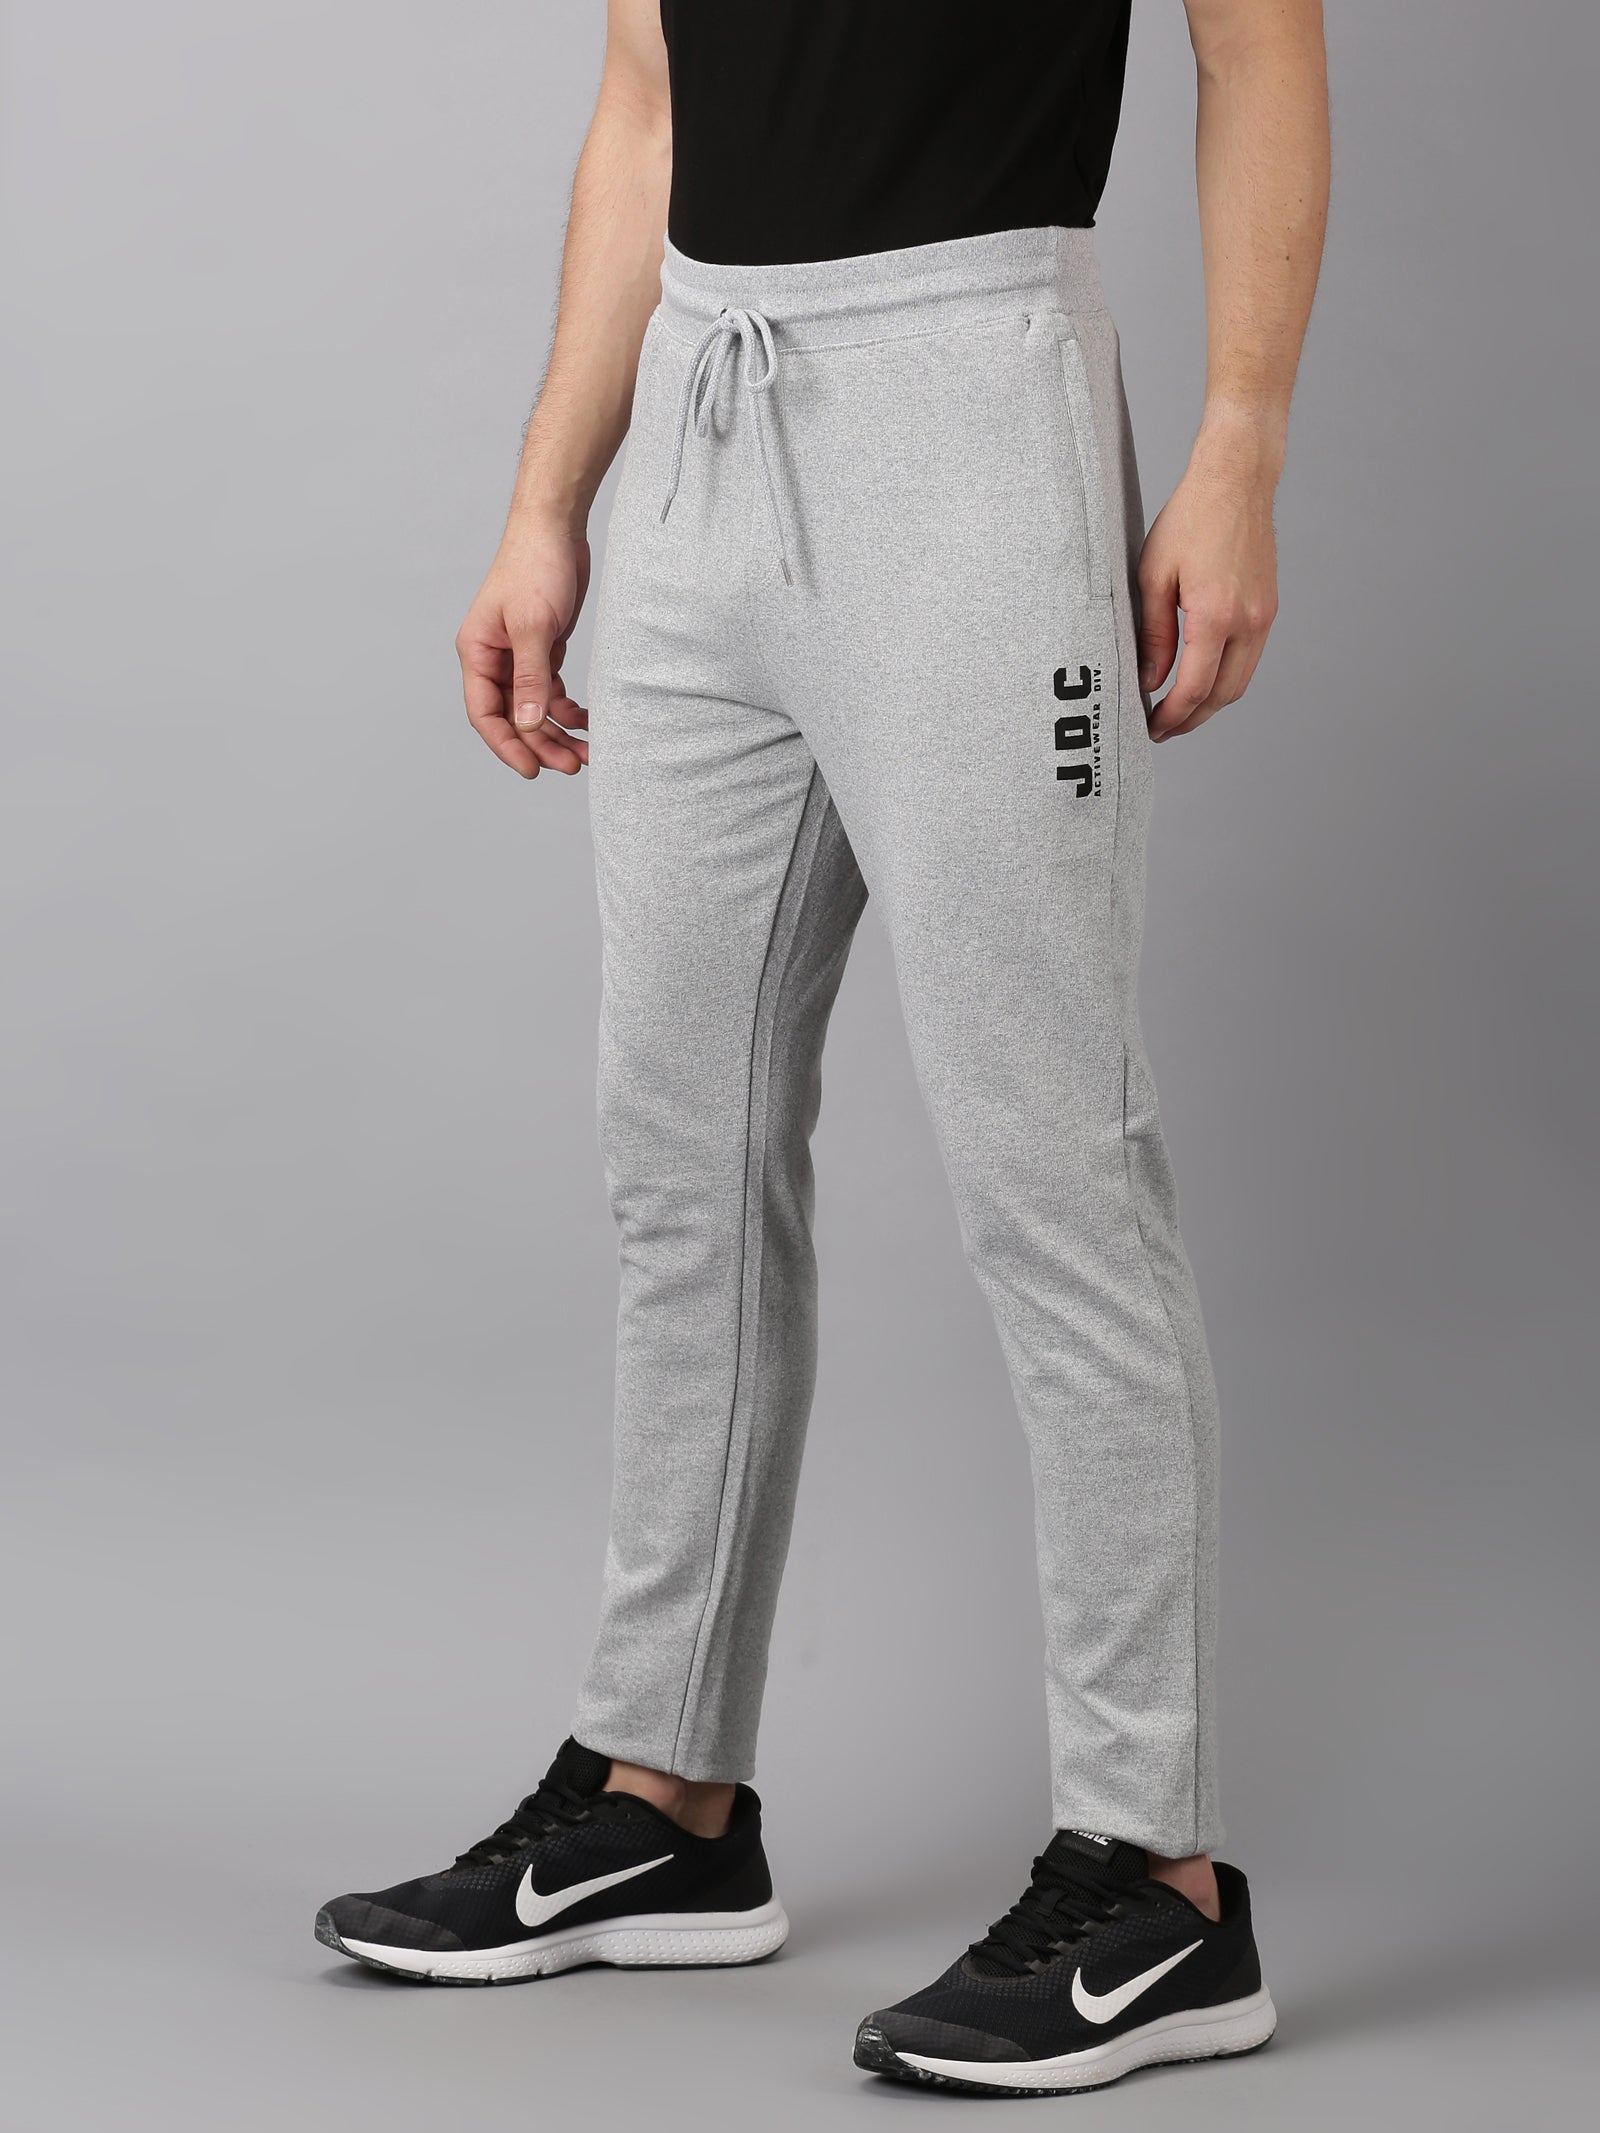 Washable 100 Percent Slim Fit Track Pants And Sportswear Joggers With Blue  Plain Men's Lower at Best Price in Alipur Duar | Joypal Basumata & Co.